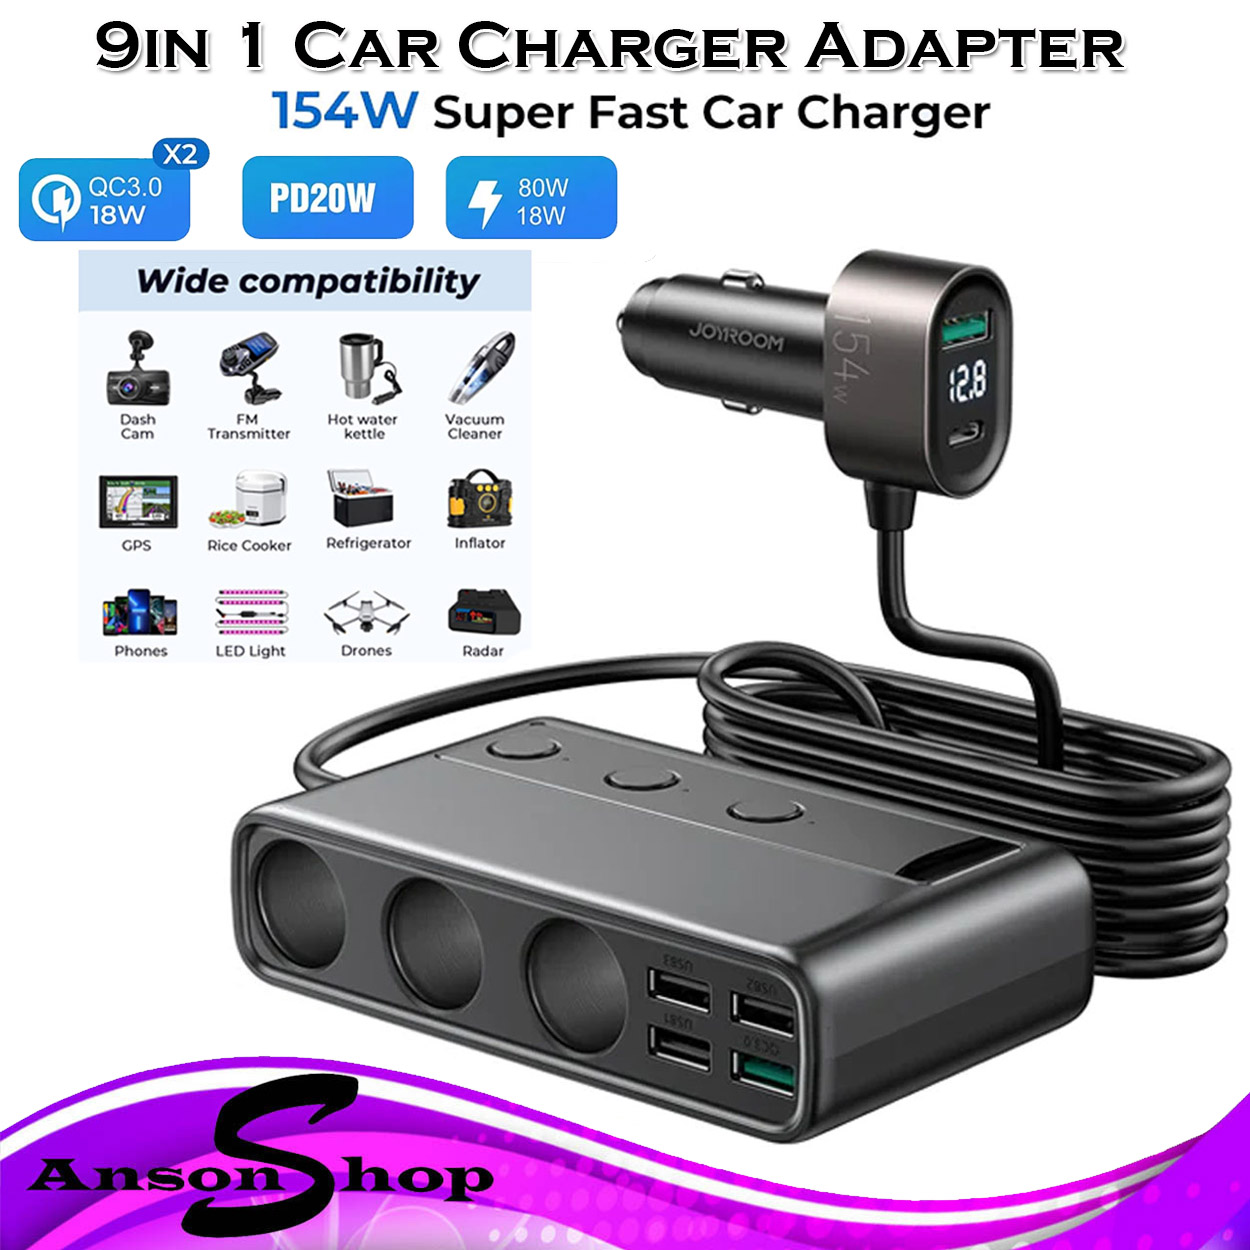 9 in 1 Car Charger Adapter, Joyroom 3 Socket Cigarette Lighter Splitter  with PD/QC 3.0 * 2 Charge(3.3FT Cable), 154W 12V/24V Independent Switches  DC Cigarette Outlet Car Charger for All Car Devices